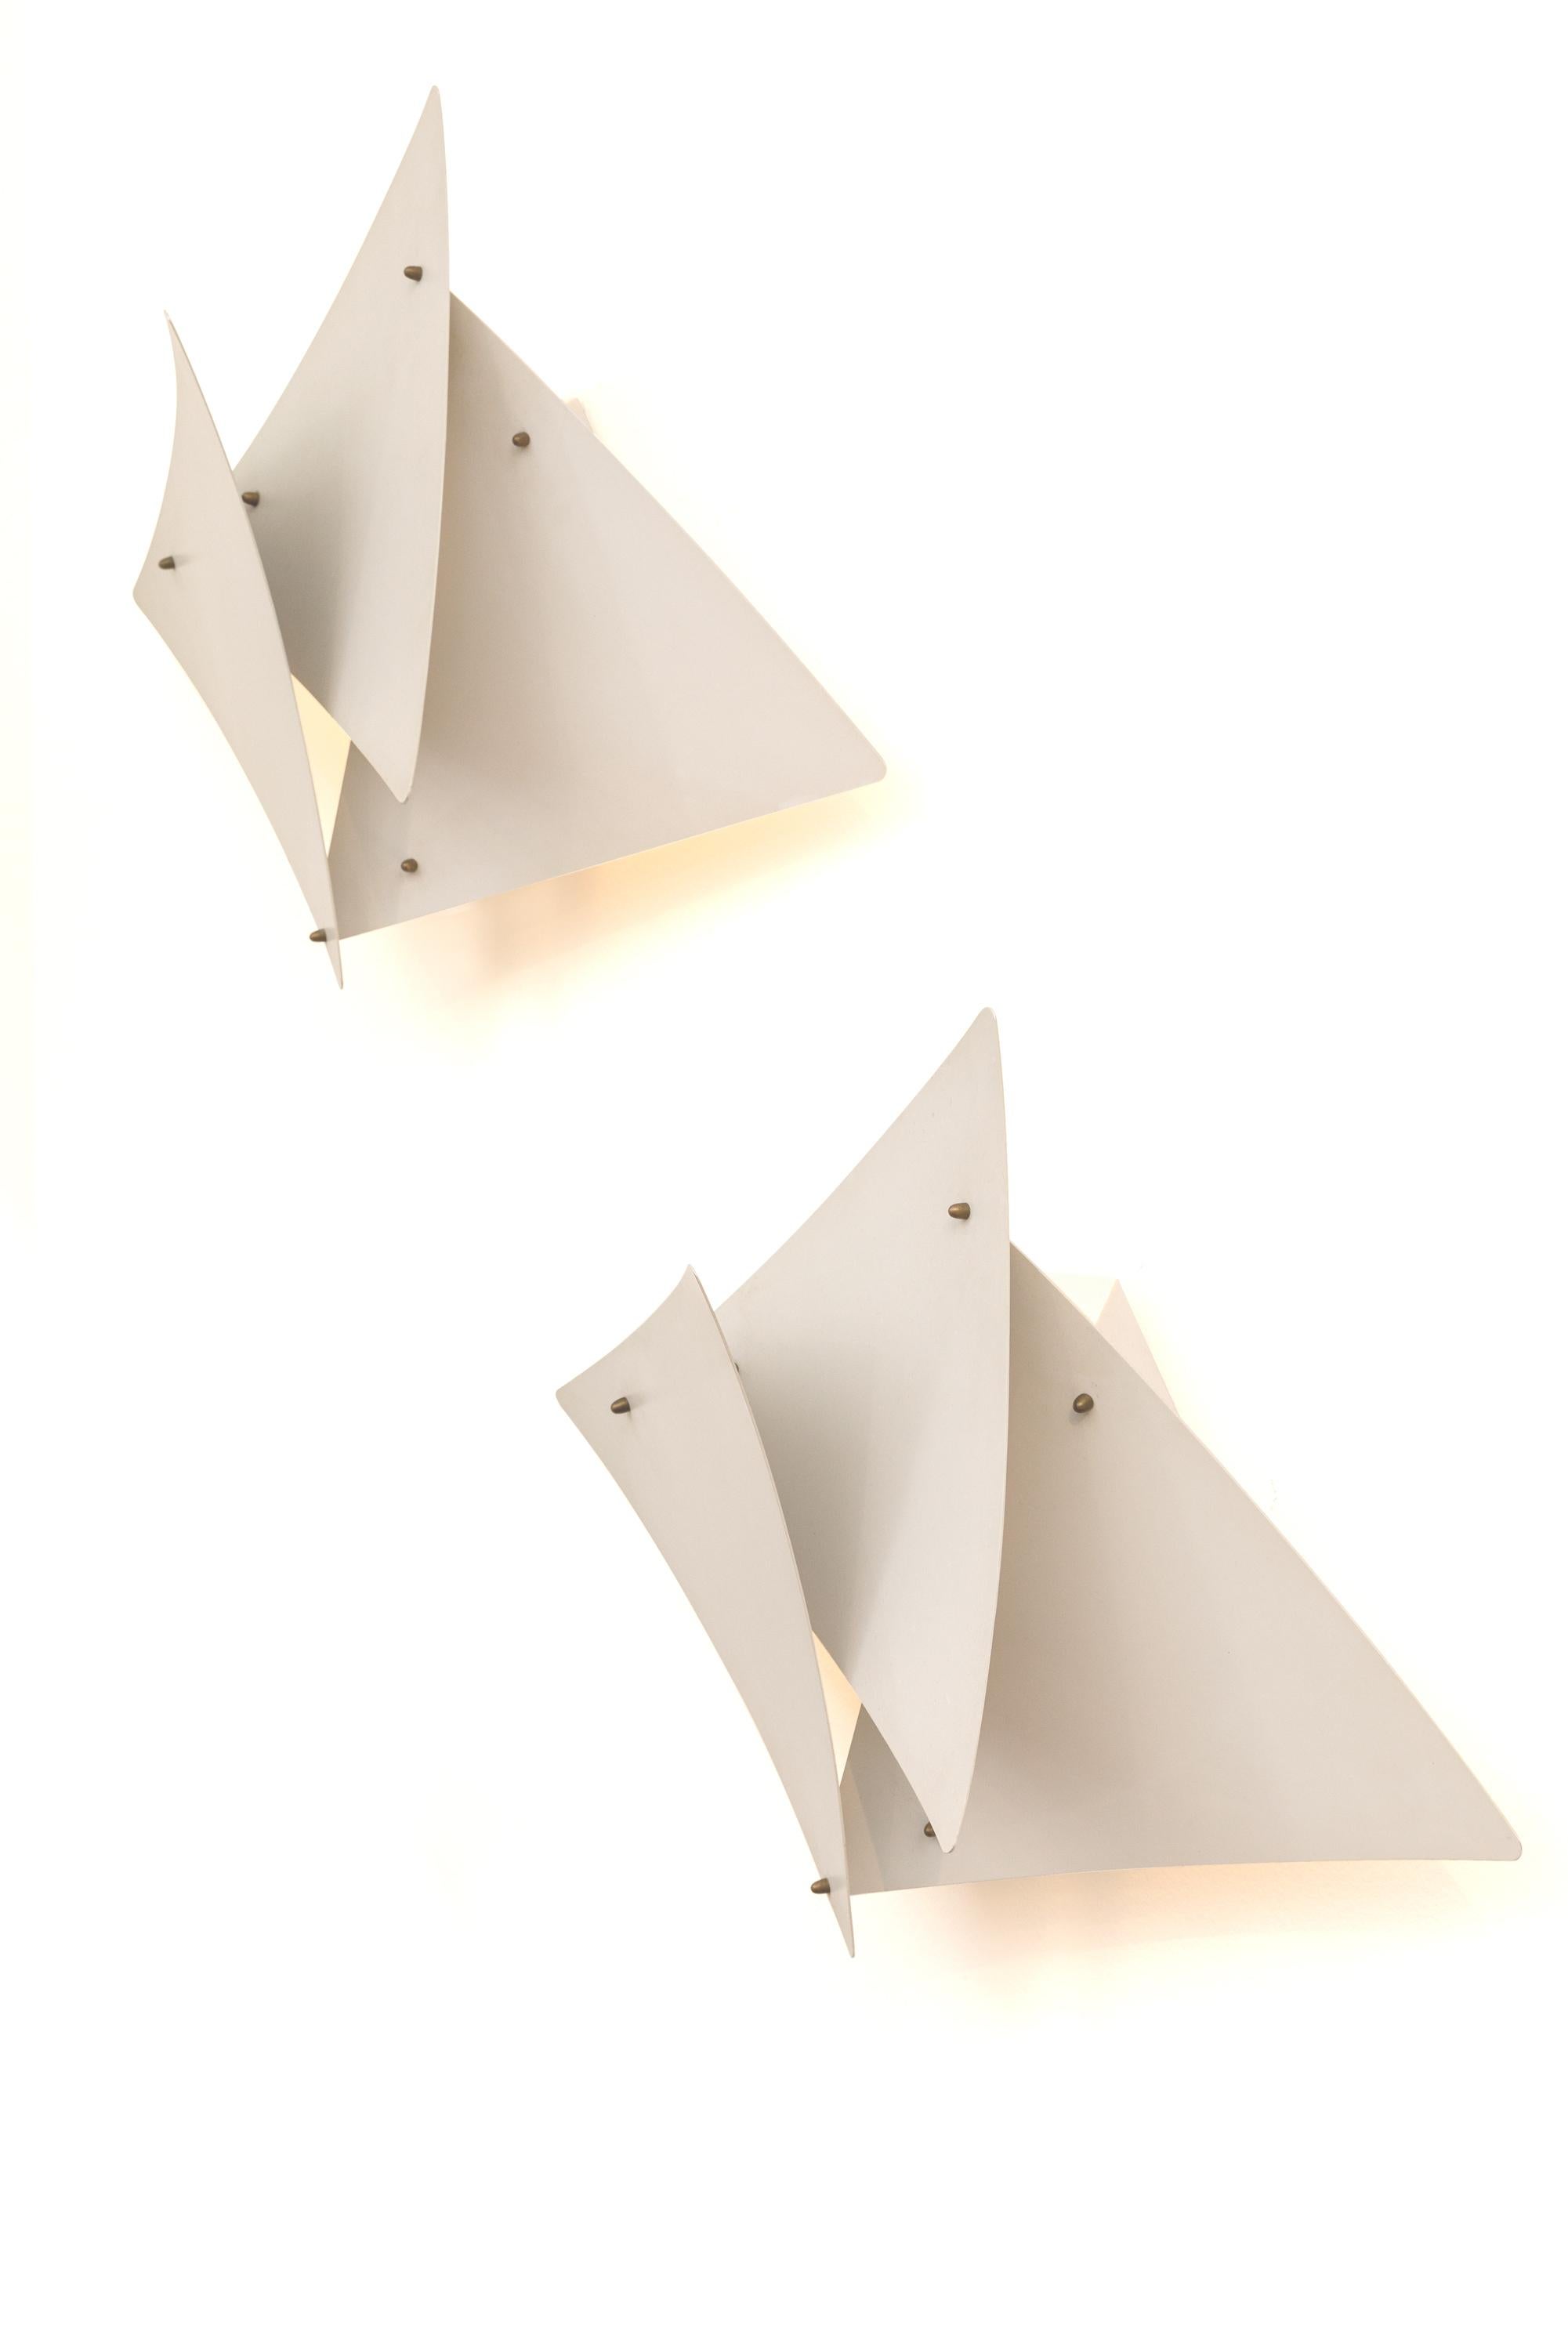 Preben Dahl's Symfoni lights are immediately recognizable for their distinctive design. These sconces are rare due to the untypical subtle petal like panels not usually seen on his other lights.